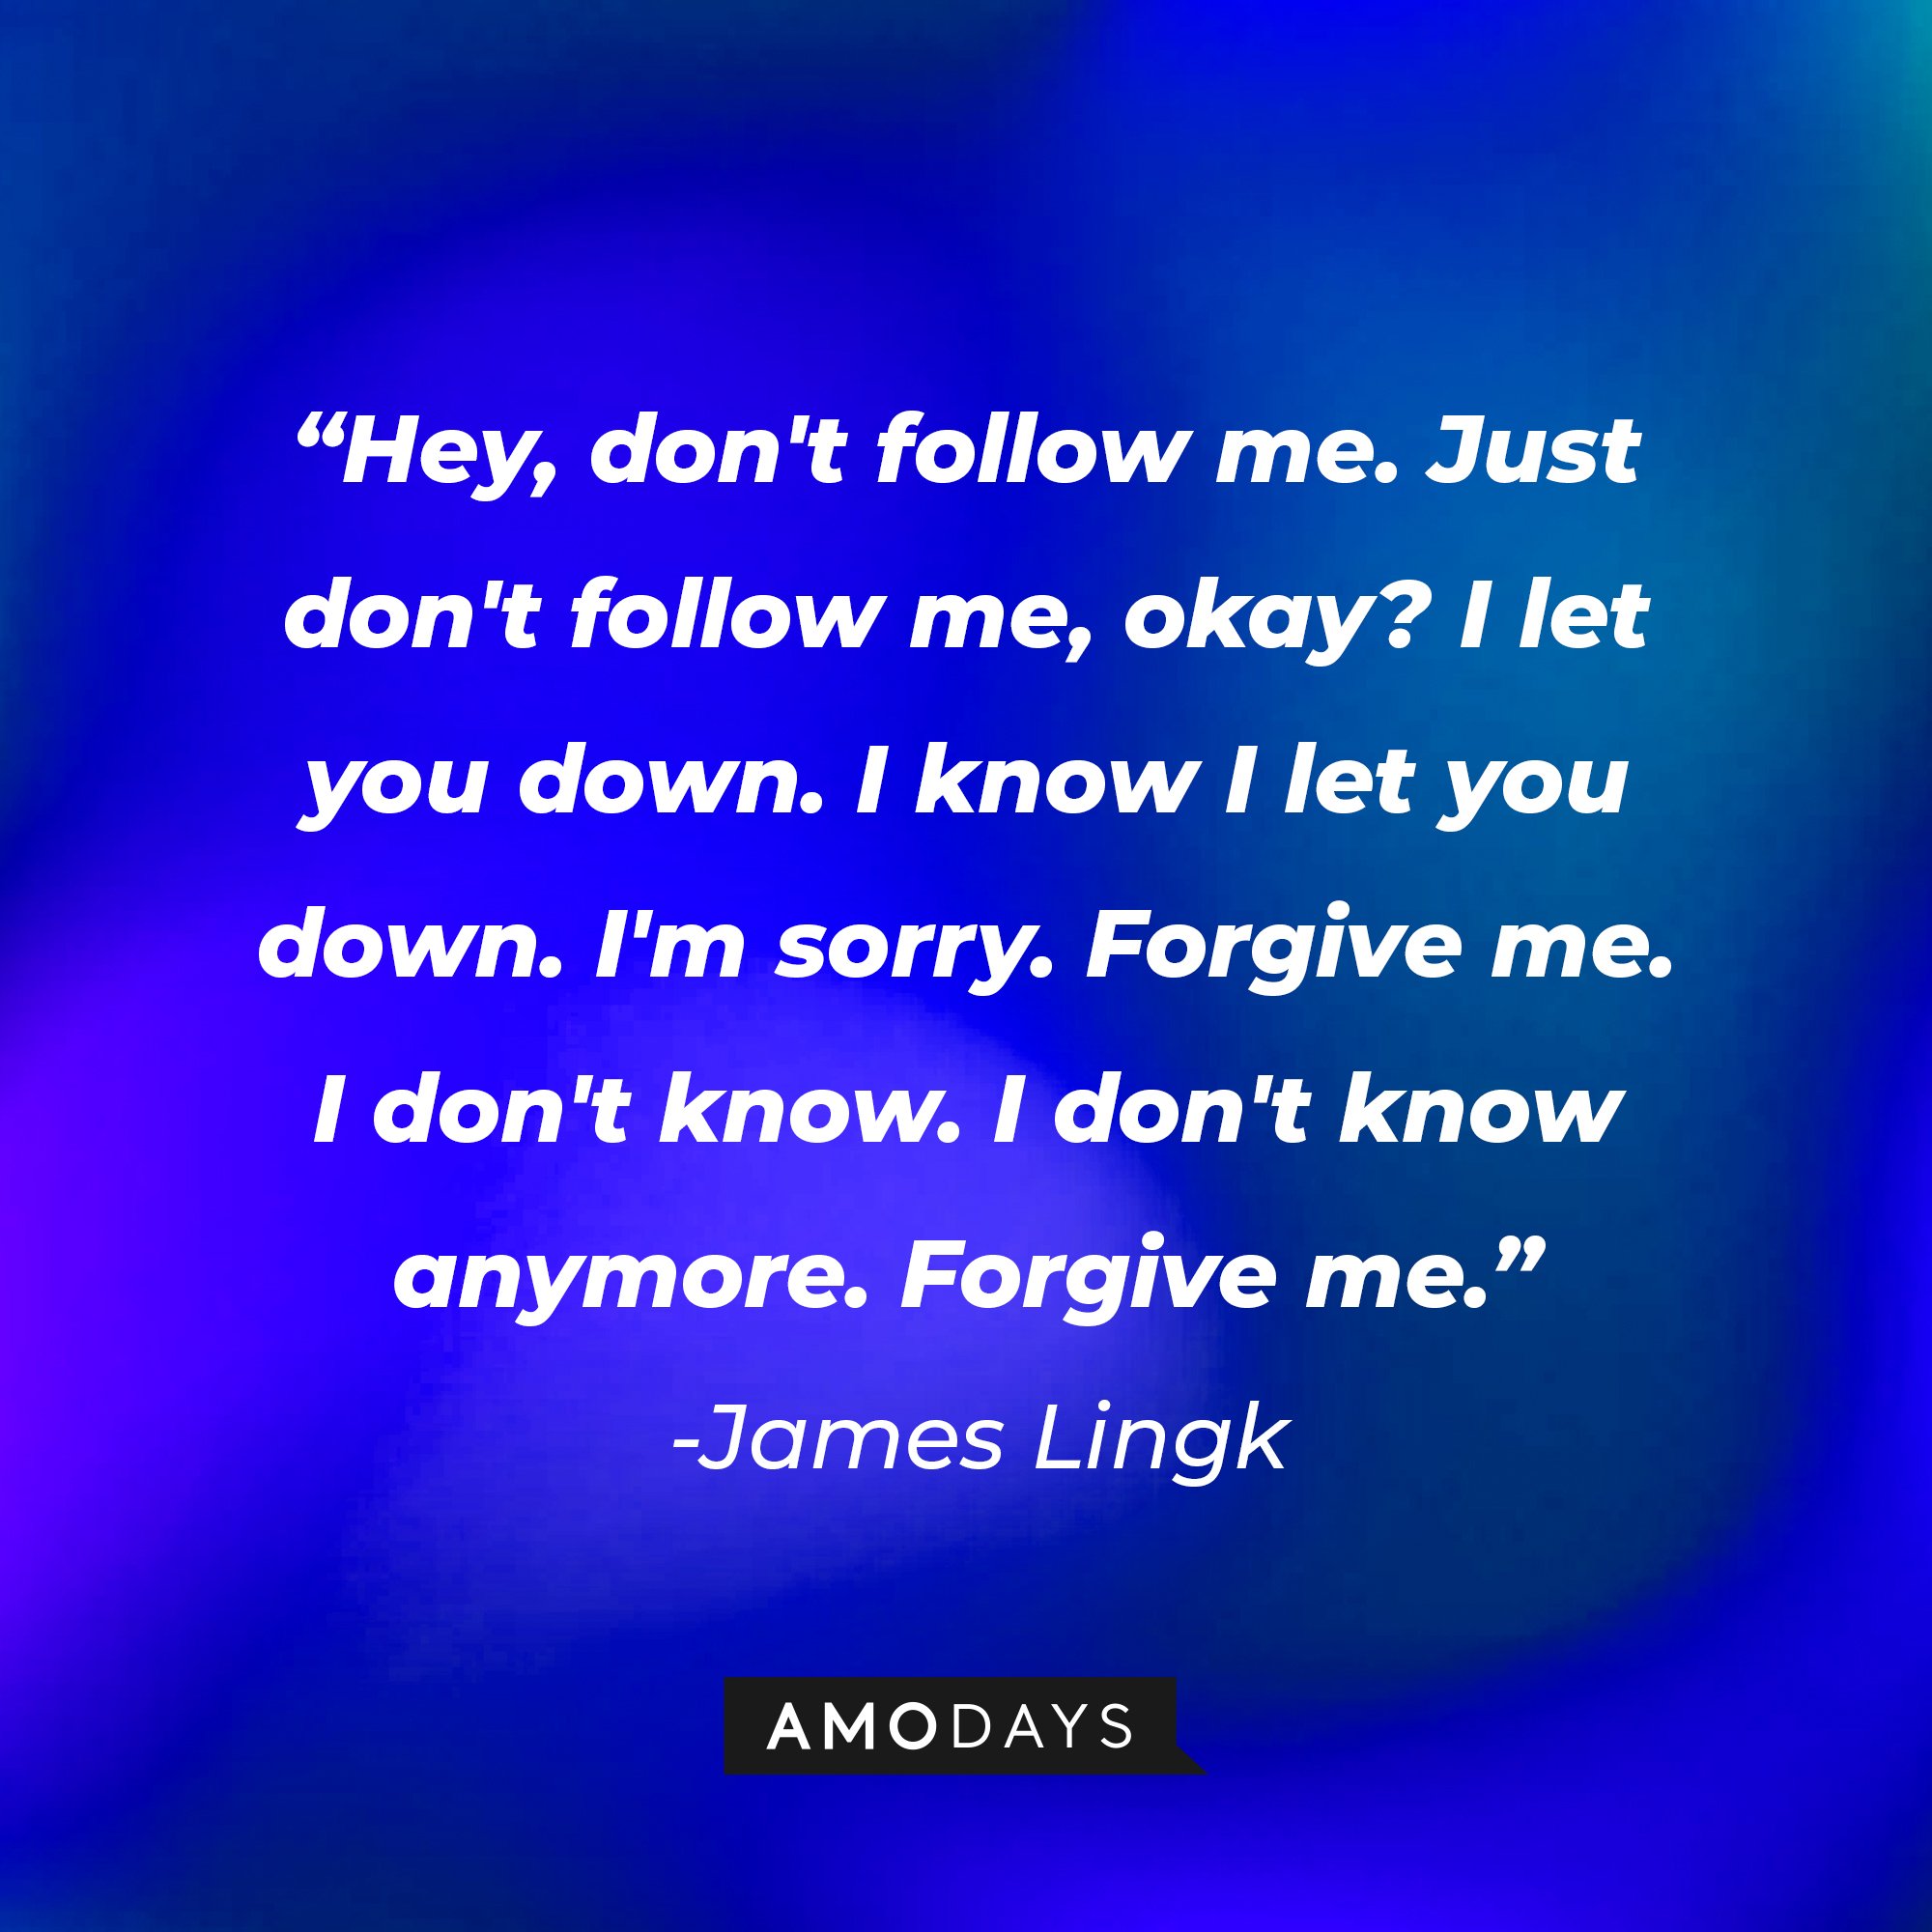 James Lingk’s quote: "Hey, don't follow me. Just don't follow me, okay? I let you down. I know I let you down. I'm sorry. Forgive me. I don't know. I don't know anymore. Forgive me."  | Image: AmoDays